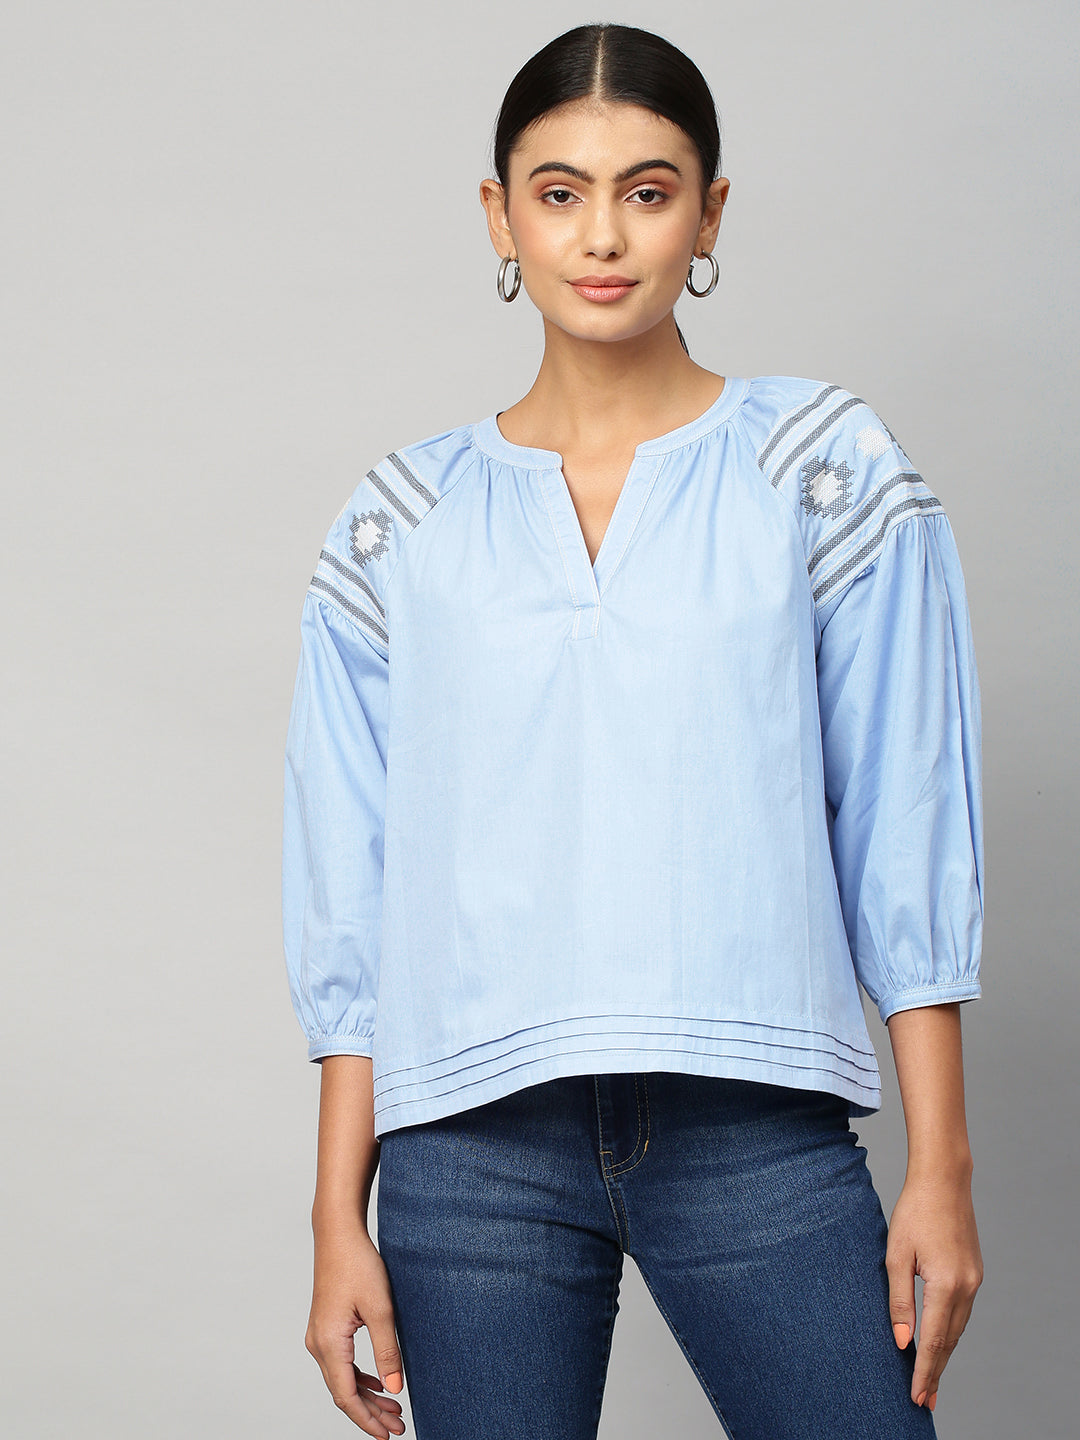 Cotton Poplin Embroidered Tunic Top